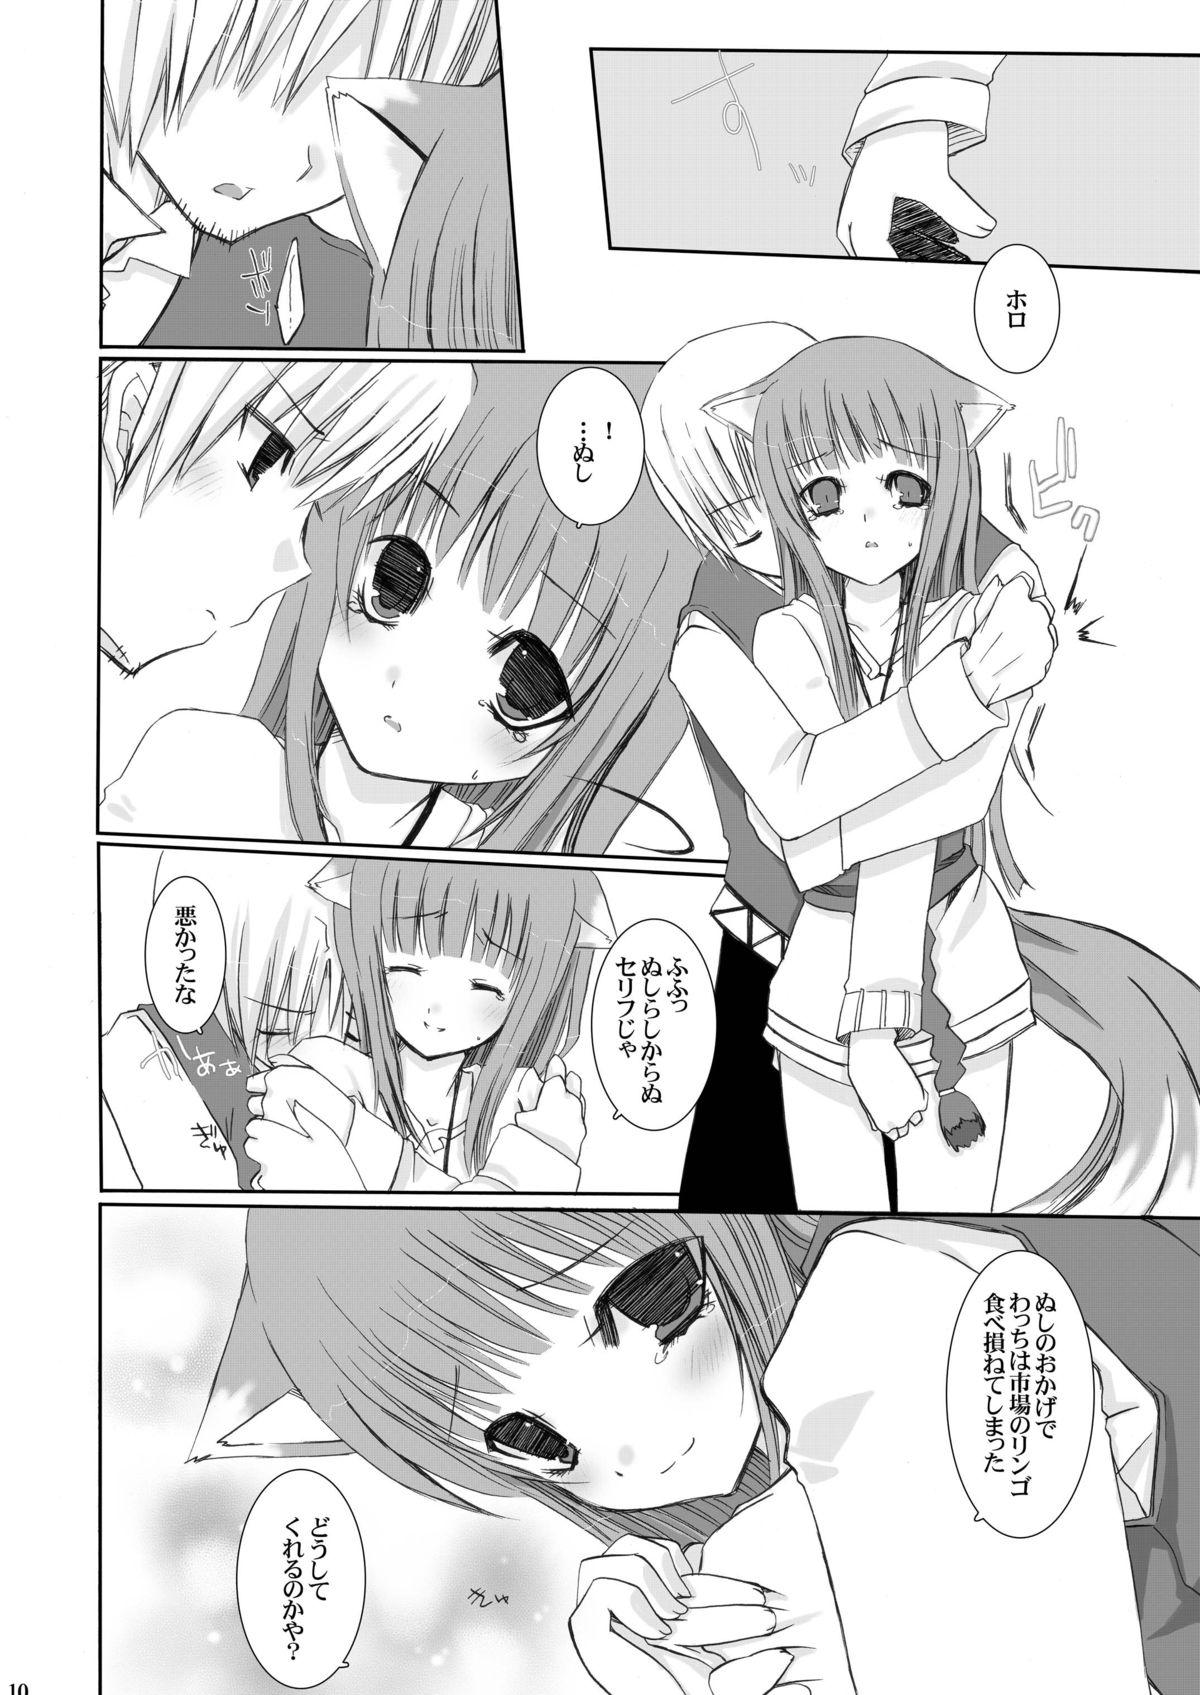 Webcamsex Fukigen na Ookami - Spice and wolf Anal Gape - Page 10